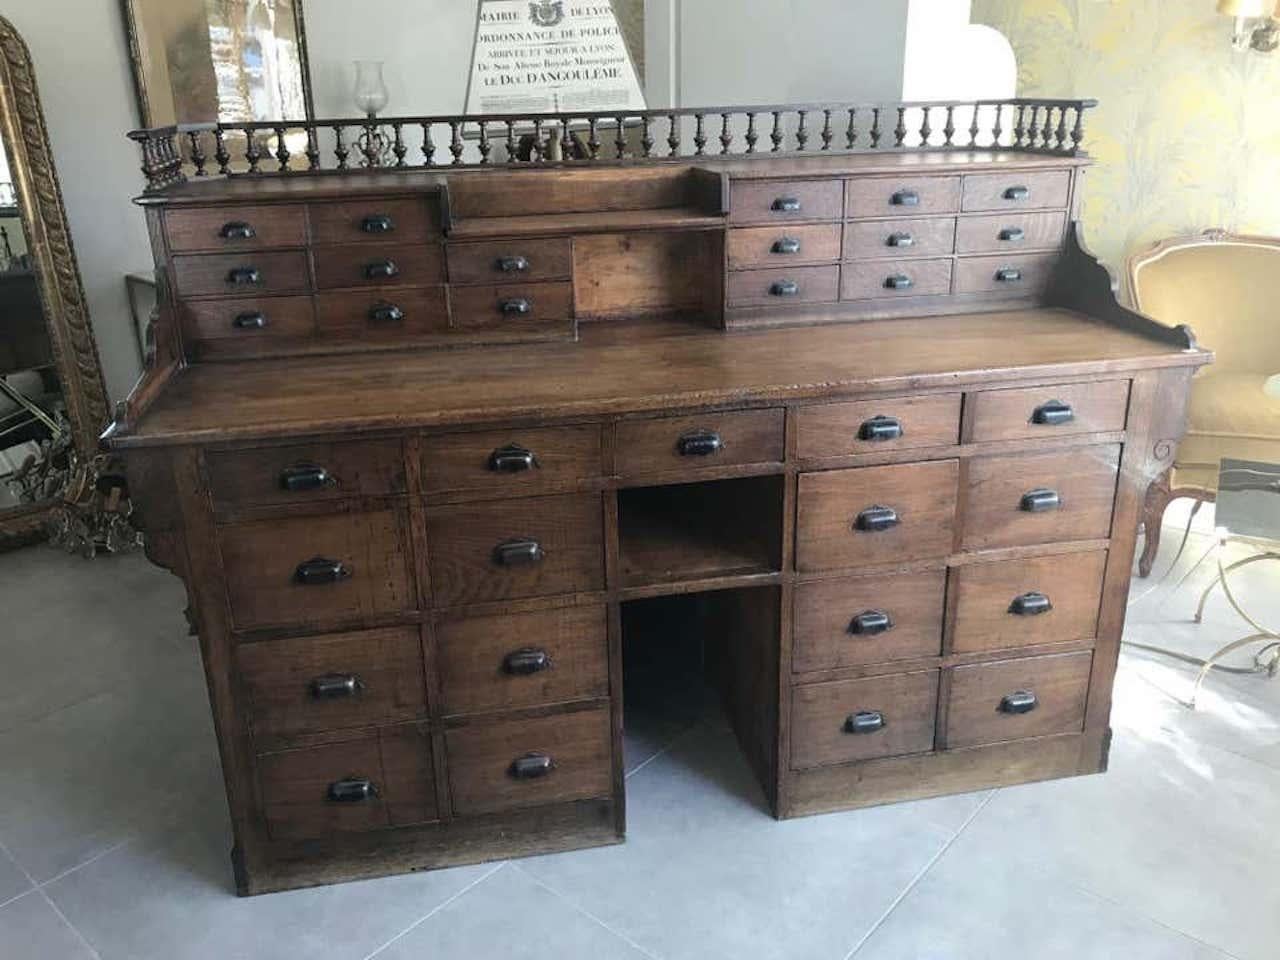 Exceptional French oak antique apothecary and pharmacy cabinet from the 1900s. 
There are two parts, one part is intended for the customer and the other part is intended for the seller. 
There is a mirror on the customer part. Missing a glass